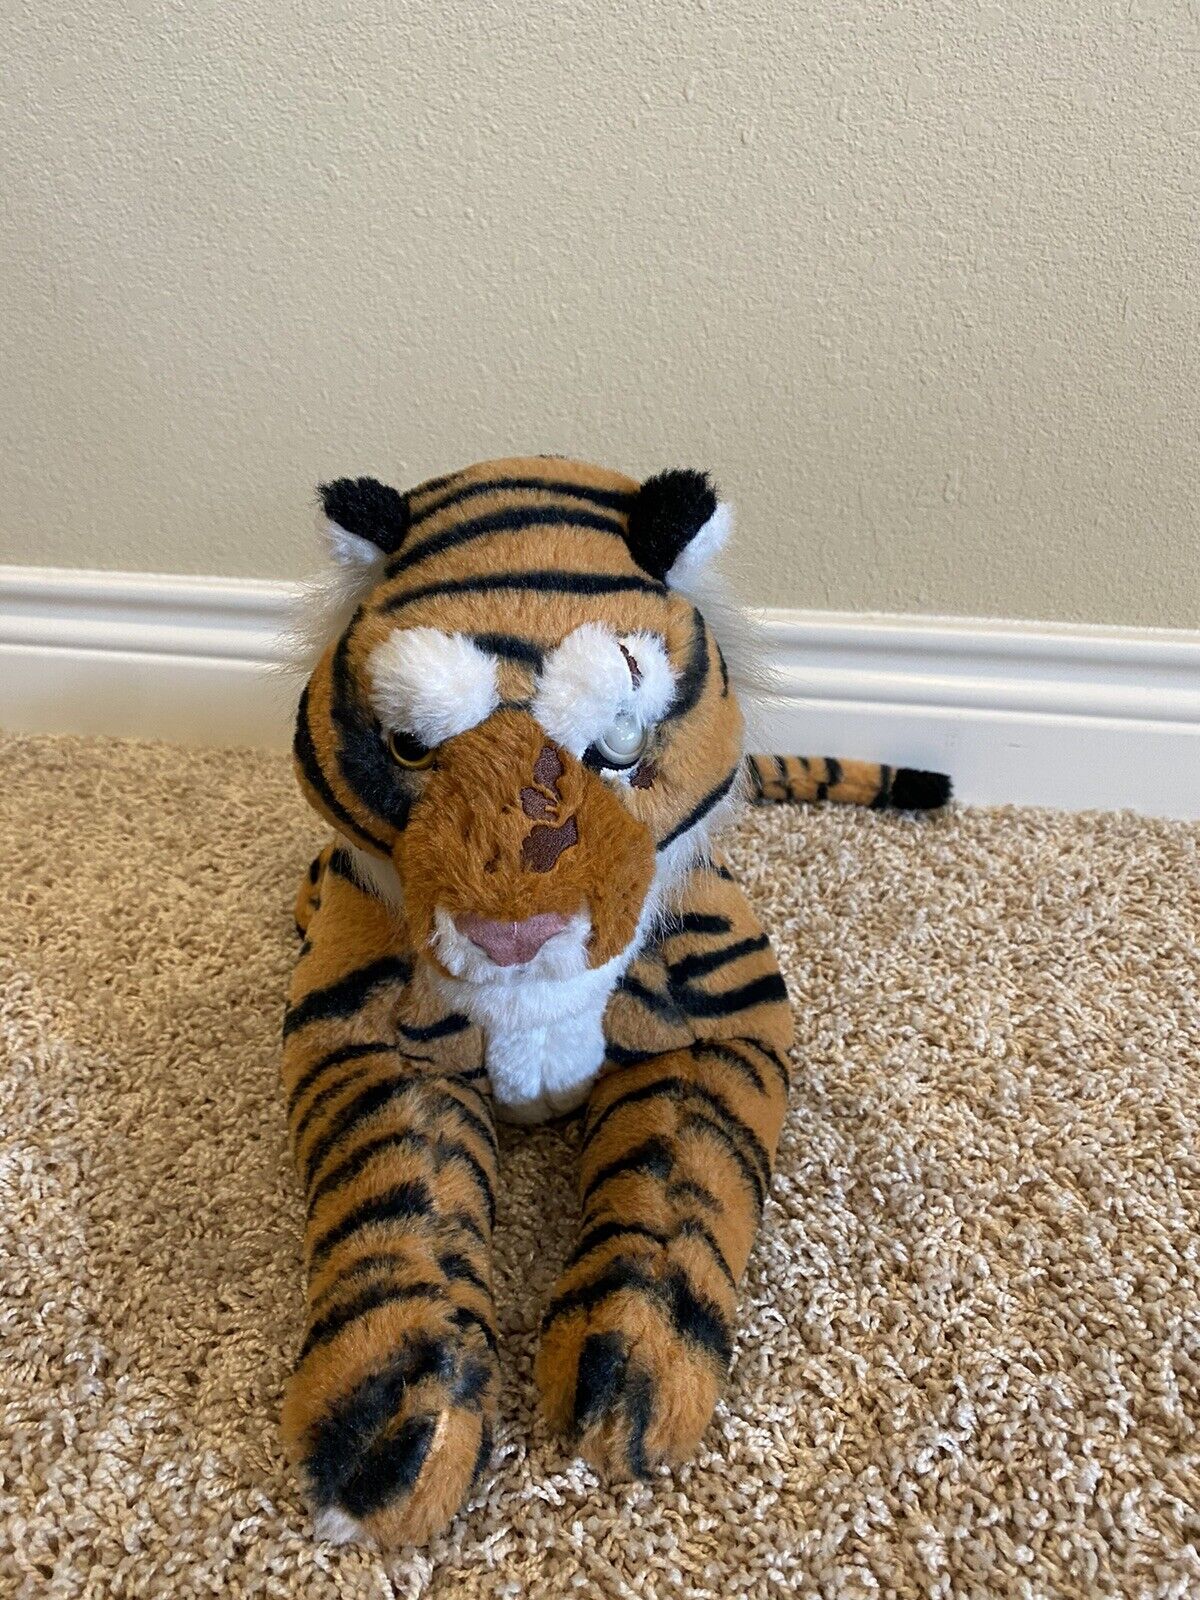 Disney Store Authentic The Jungle Book Live Action Shere Kahn Plush